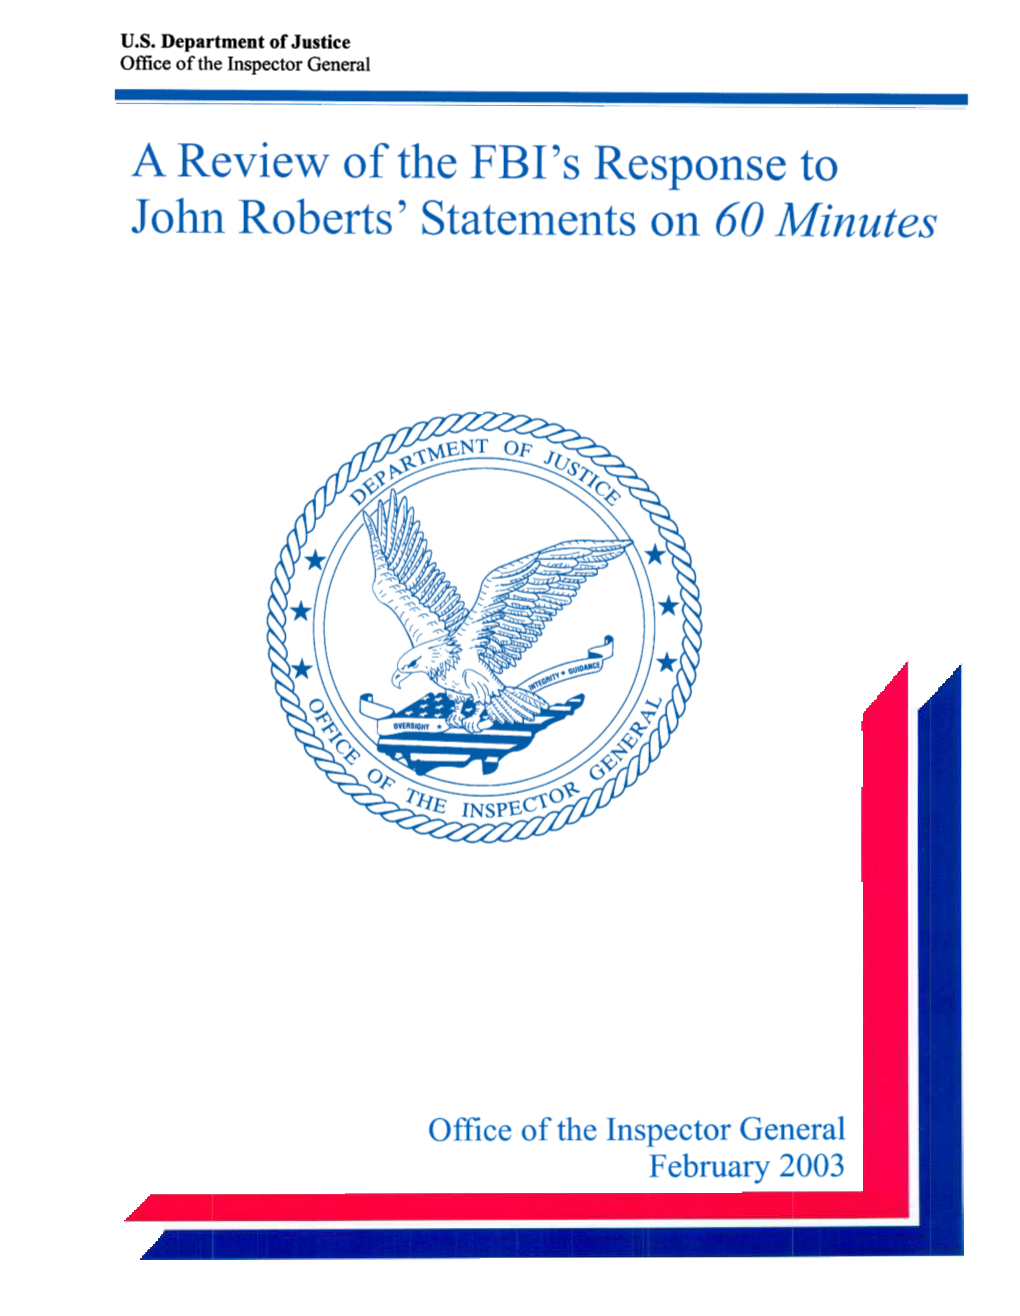 Special Report: a Review of the FBI's Response to John Roberts